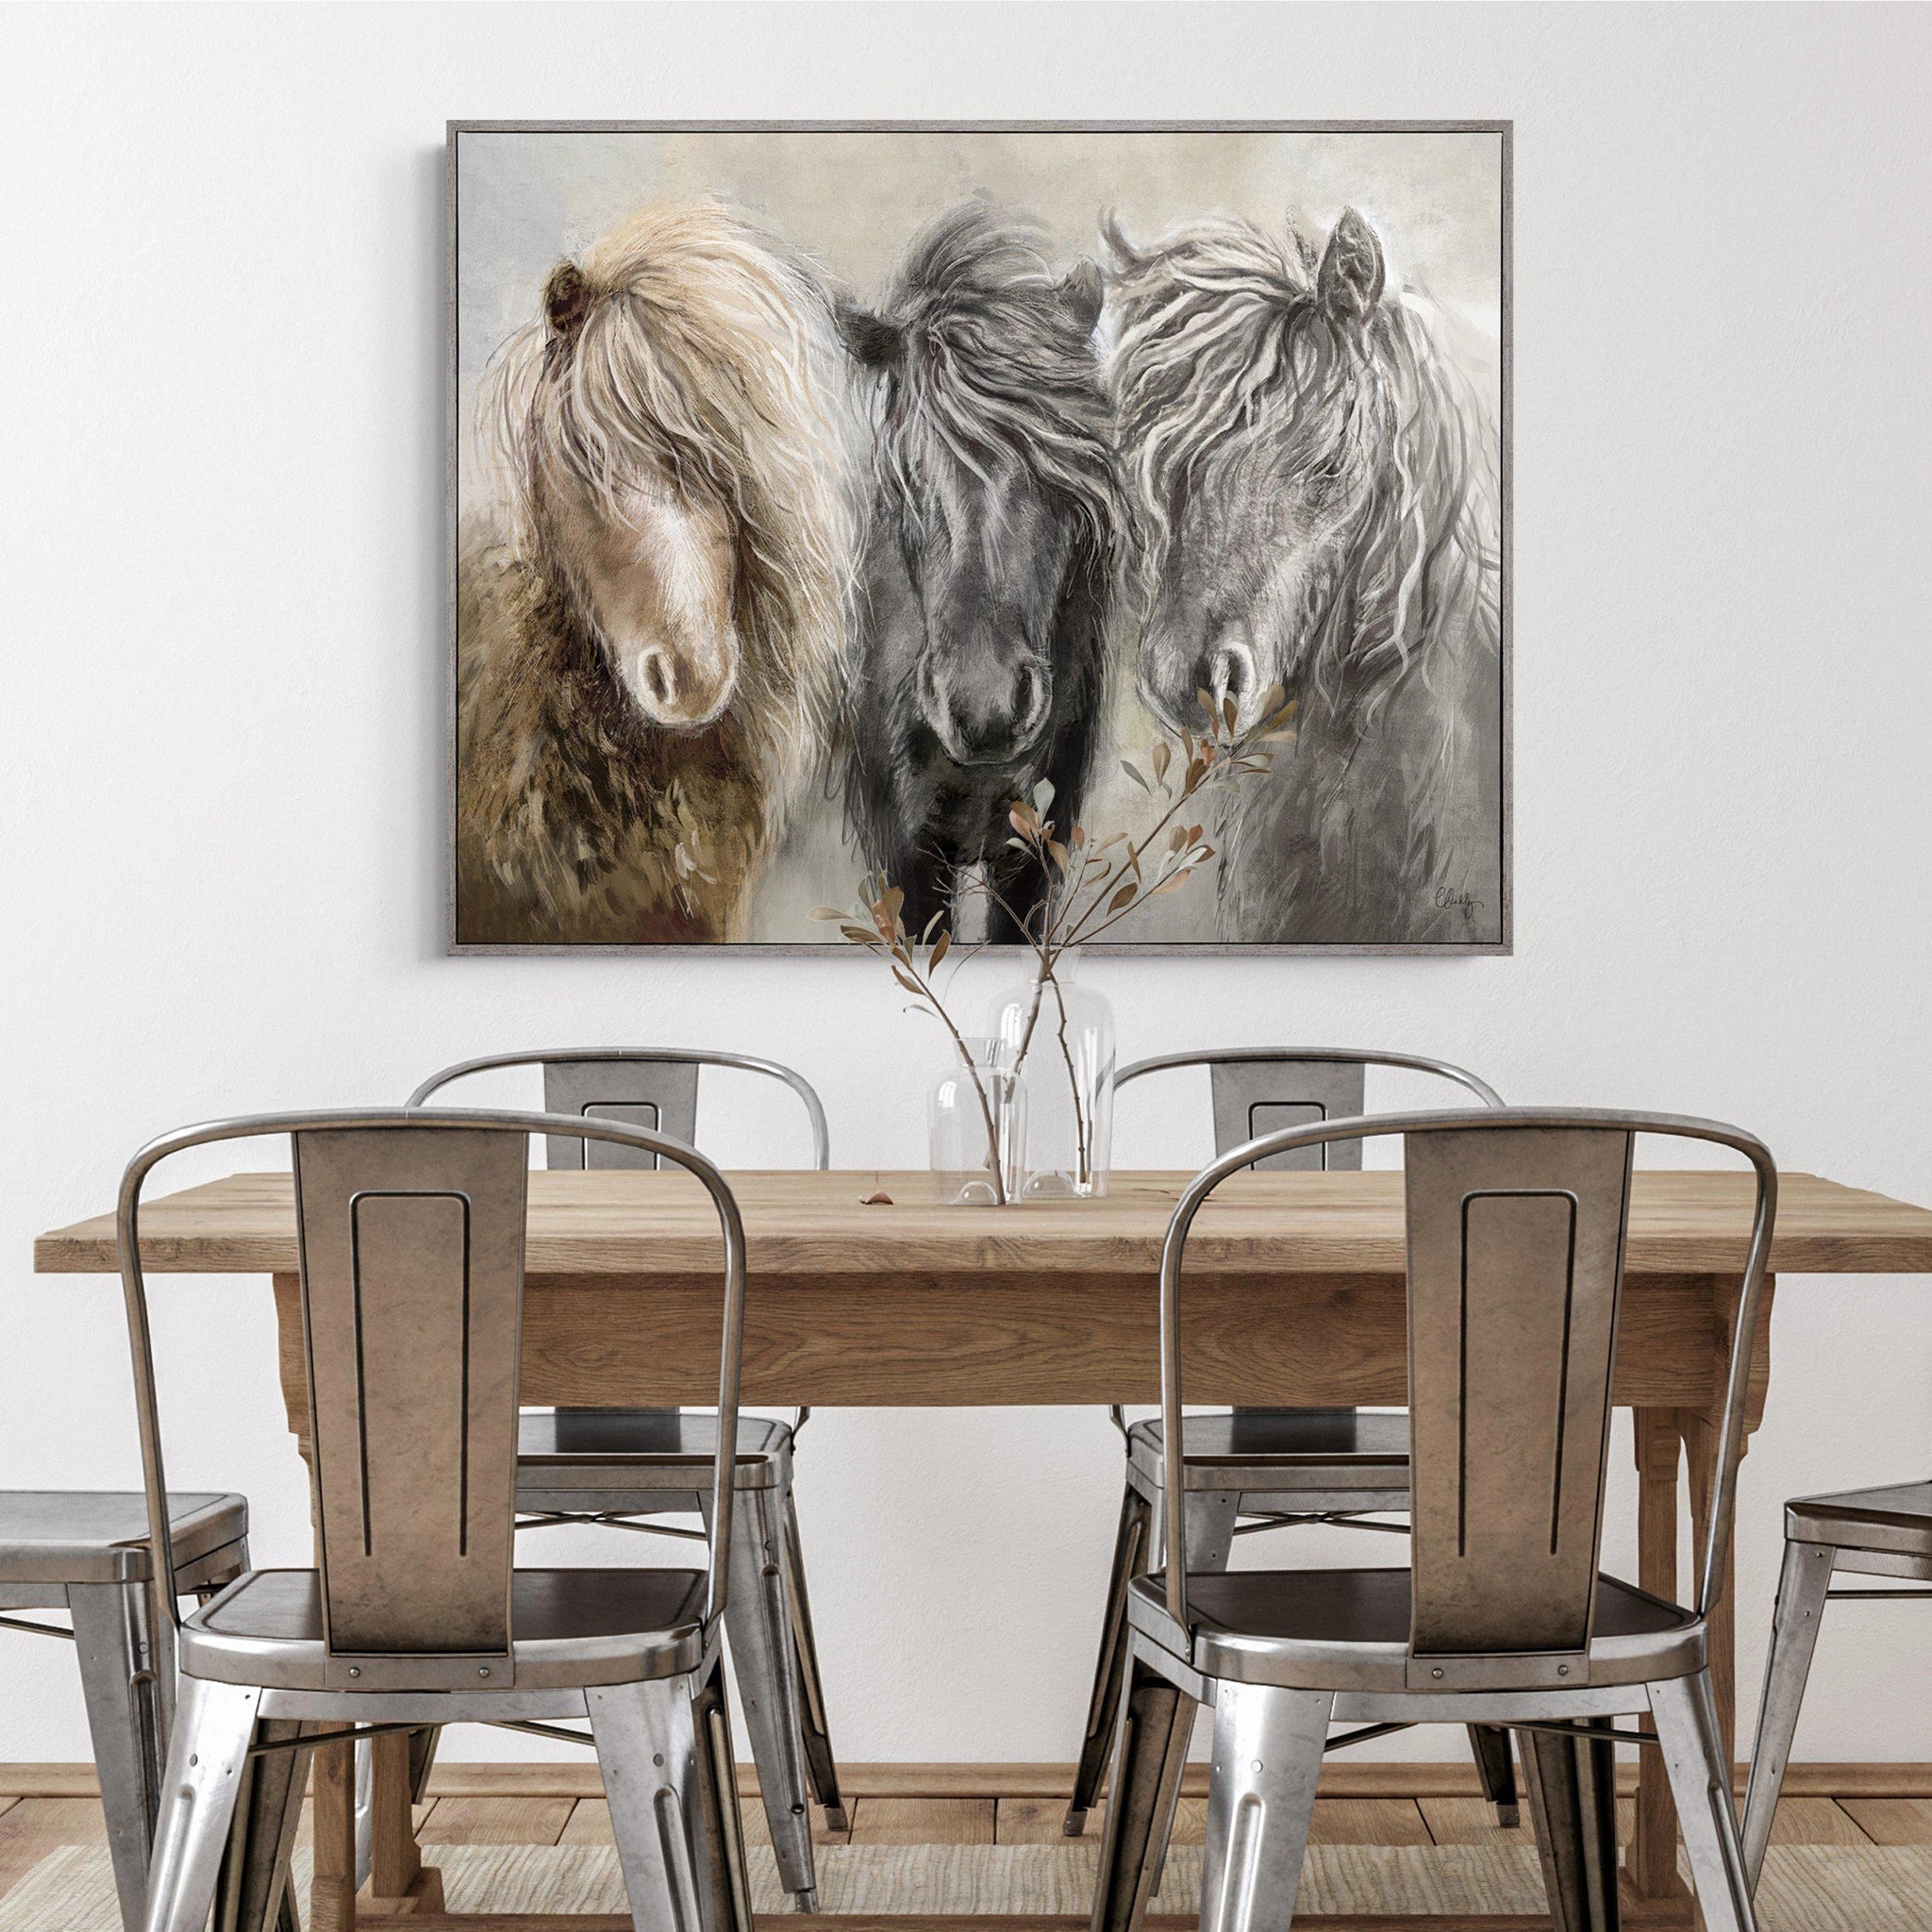 Framed canvas of three ponies in a row with an impressionist grey background of foliage hanging in light room.